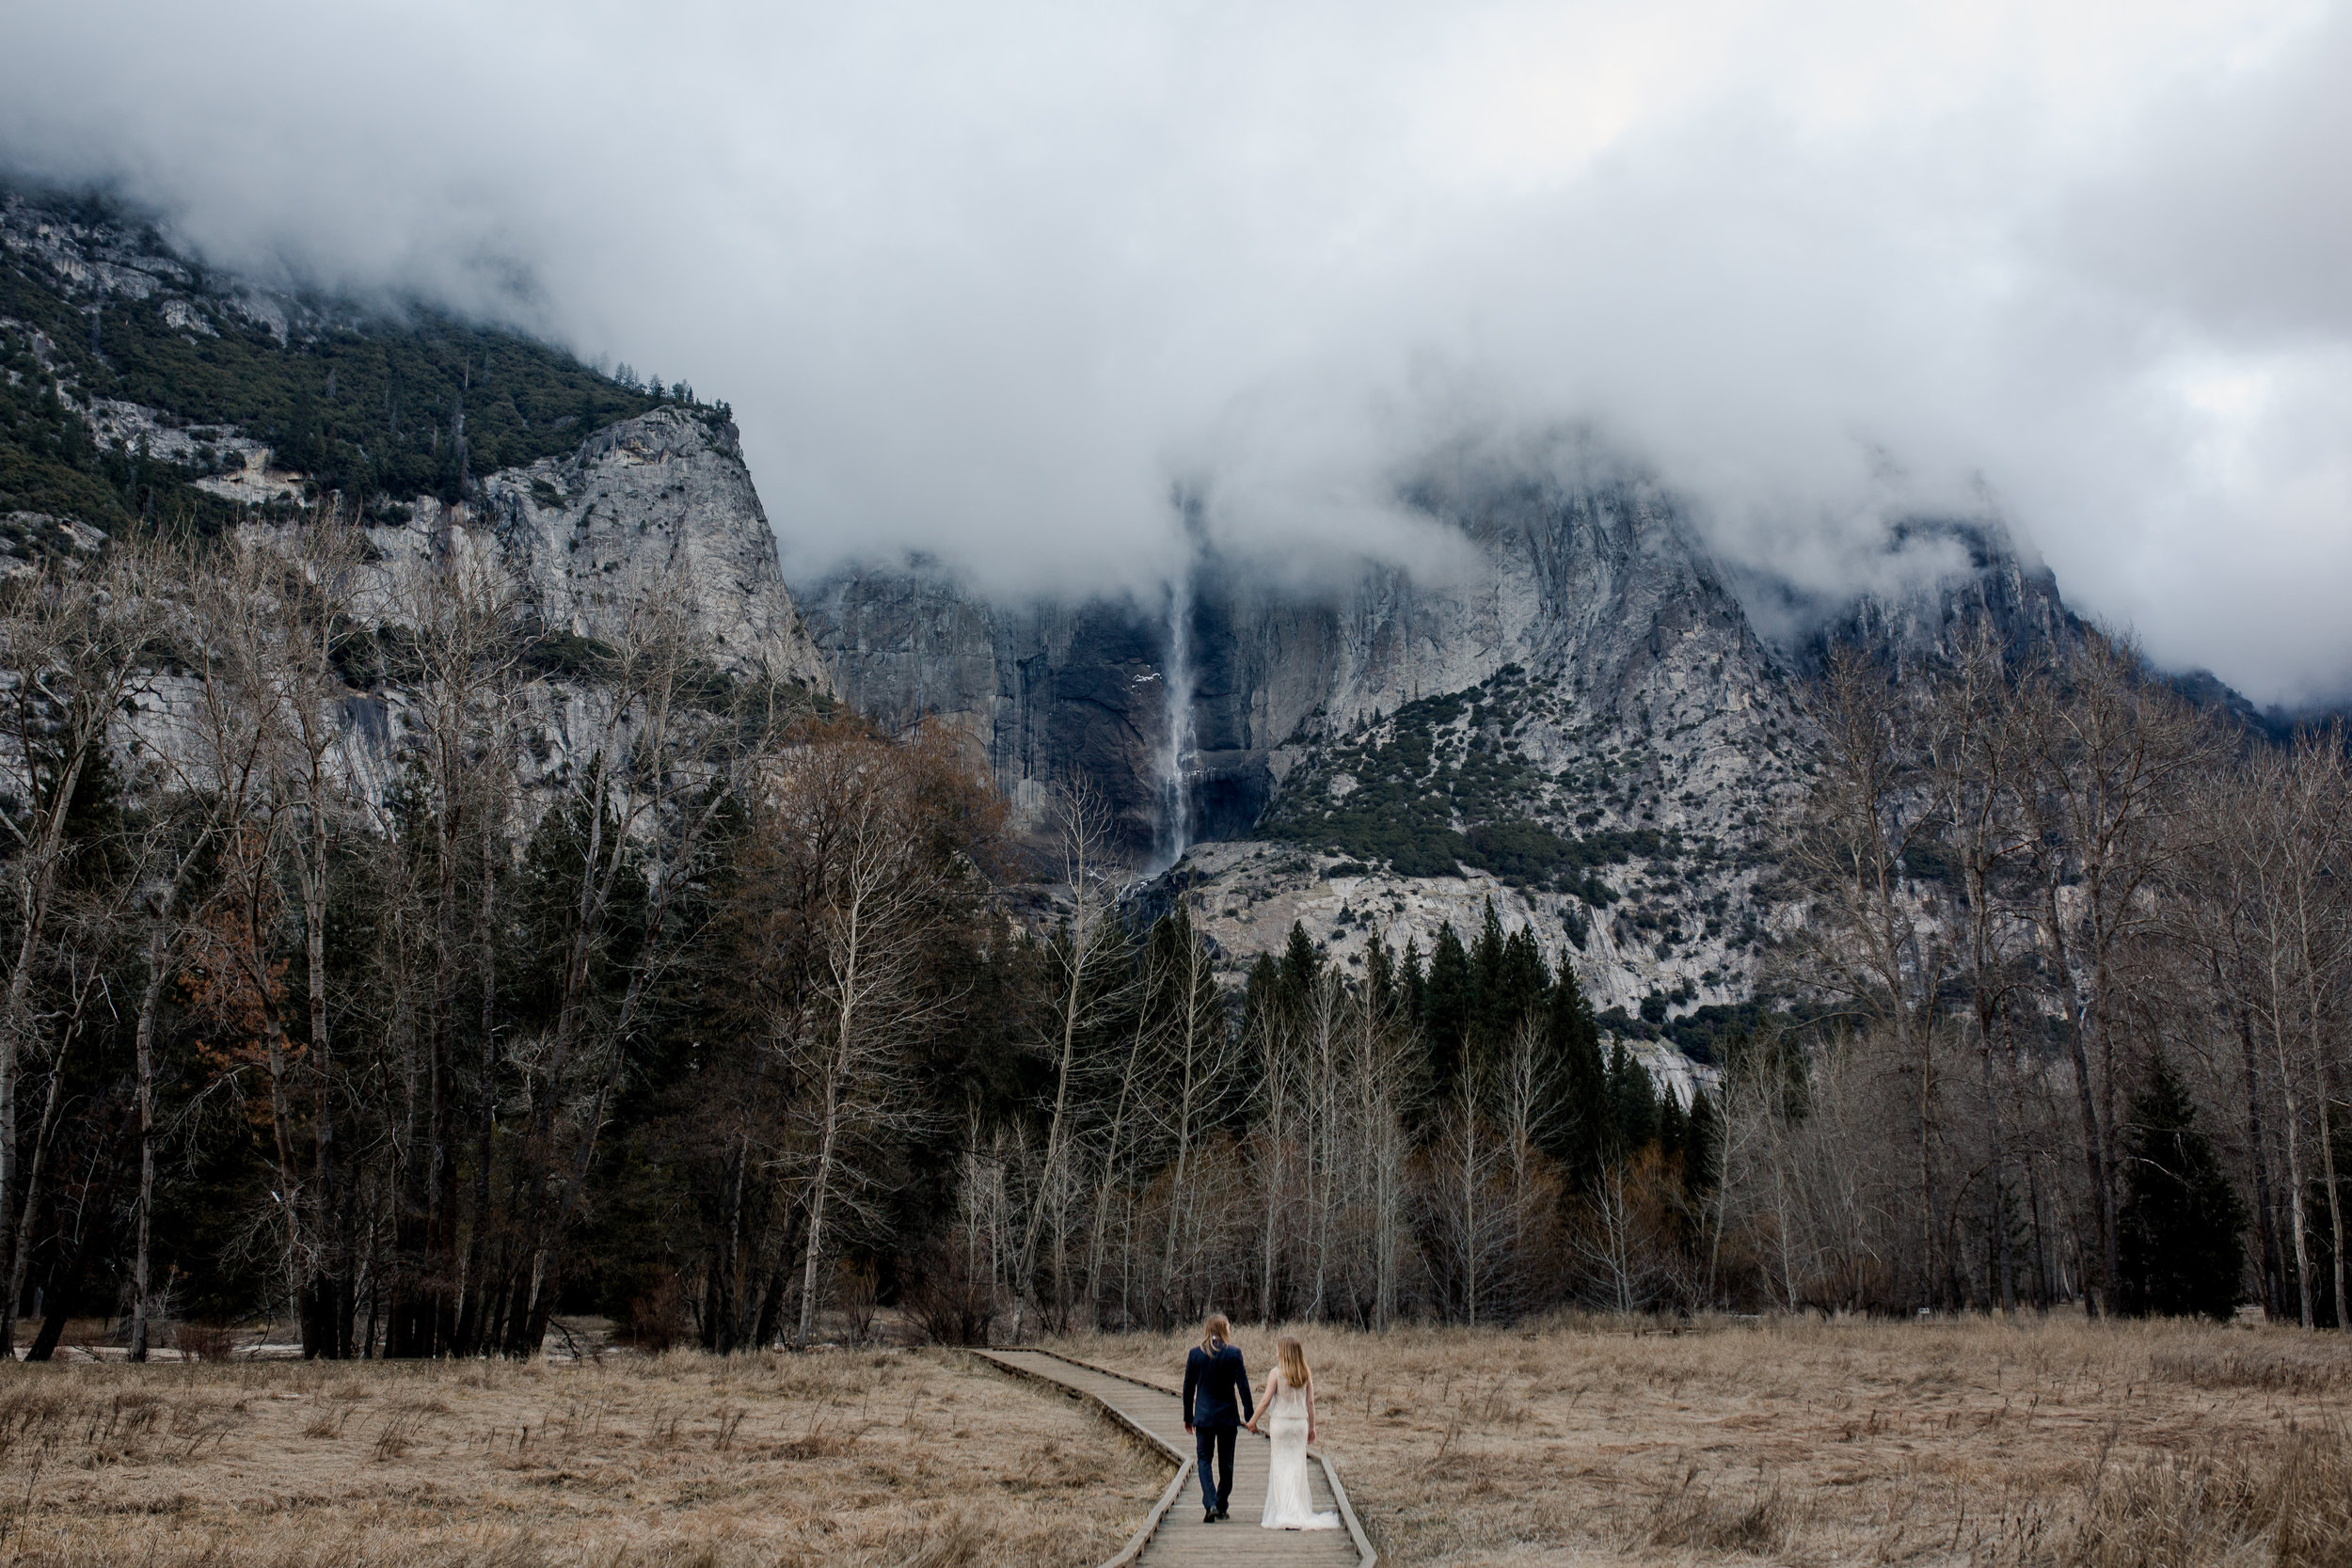 nicole-daacke-photography-yousemite-national-park-elopement-photographer-winter-cloud-moody-elope-inspiration-yosemite-valley-tunnel-view-winter-cloud-fog-weather-wedding-photos-96.jpg